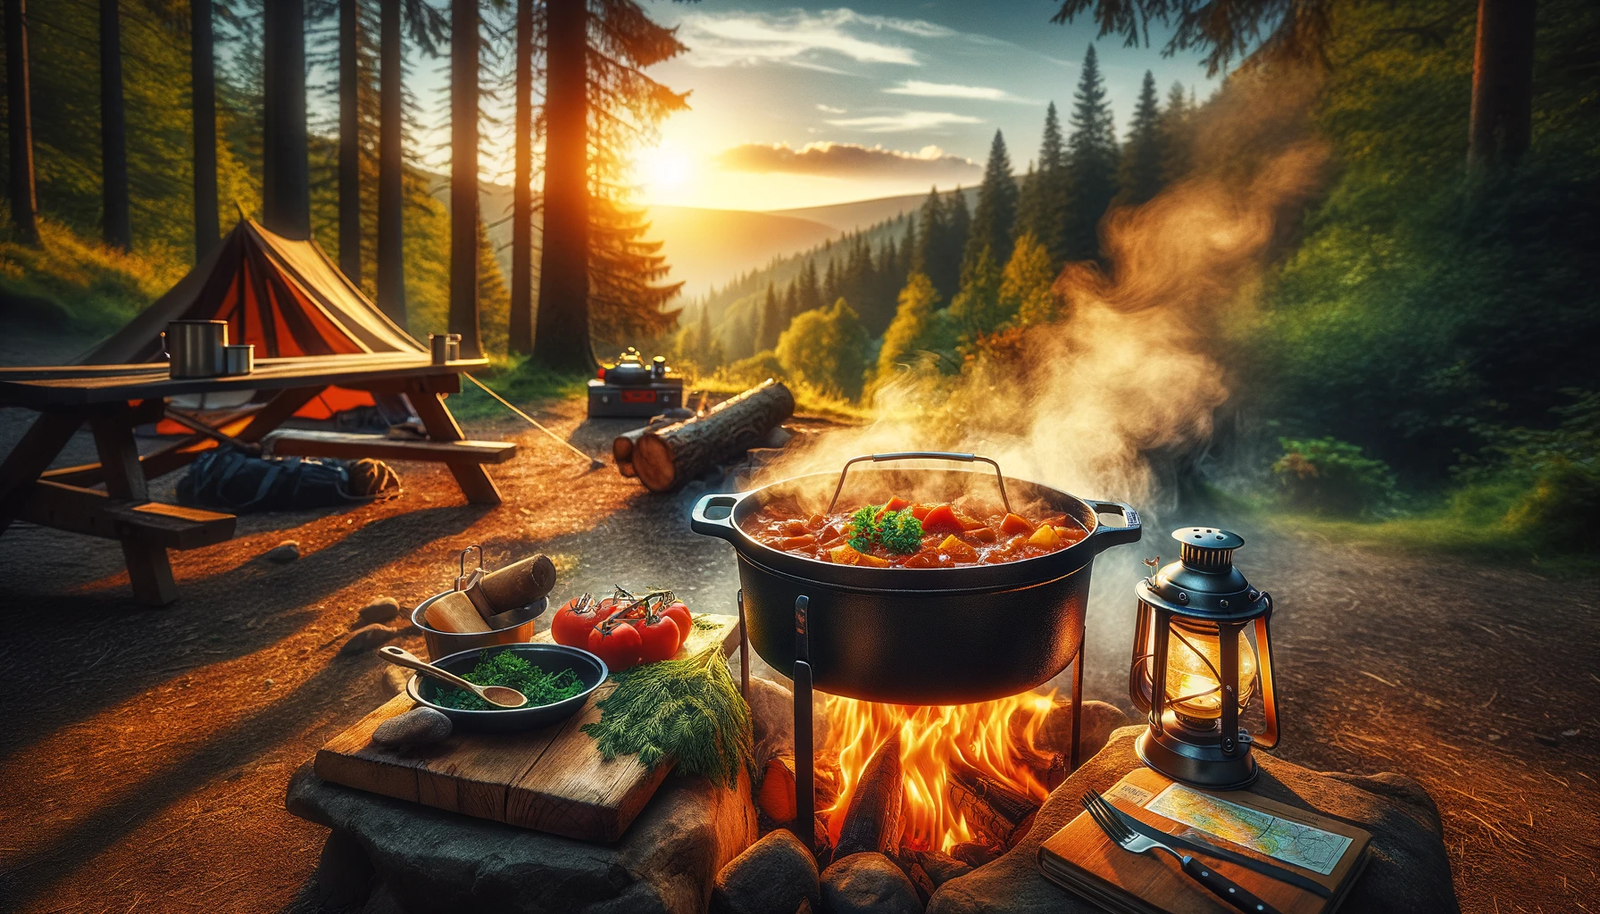 Indulge Your Tastebuds With Droolworthy Dutch Oven Camping Recipes